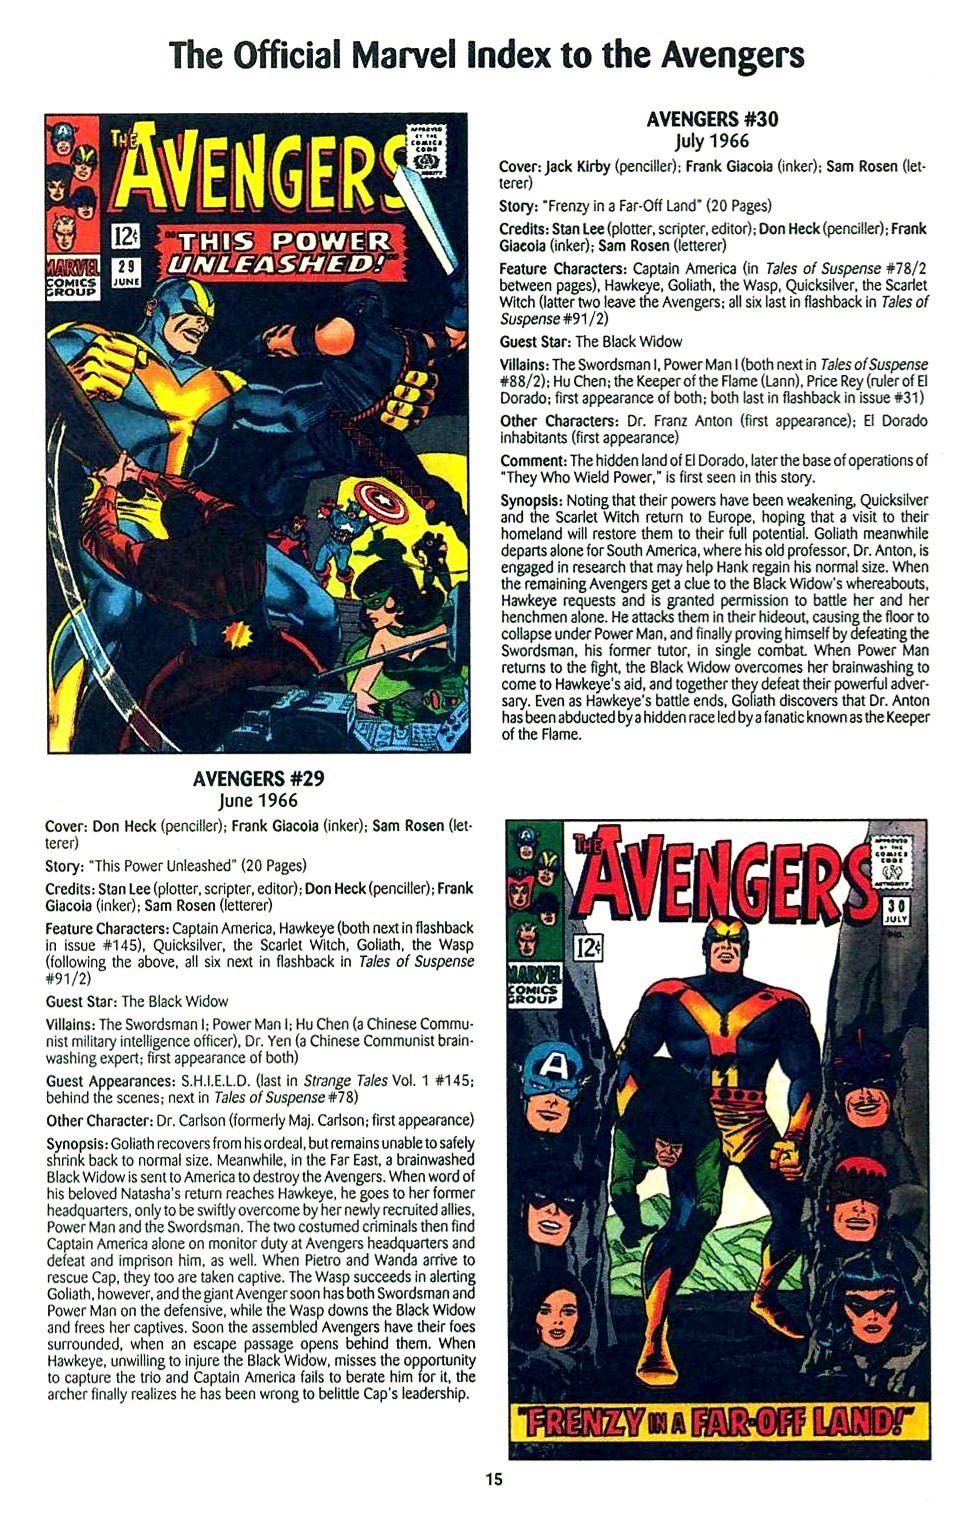 Read online The Official Marvel Index to the Avengers comic -  Issue #1 - 17